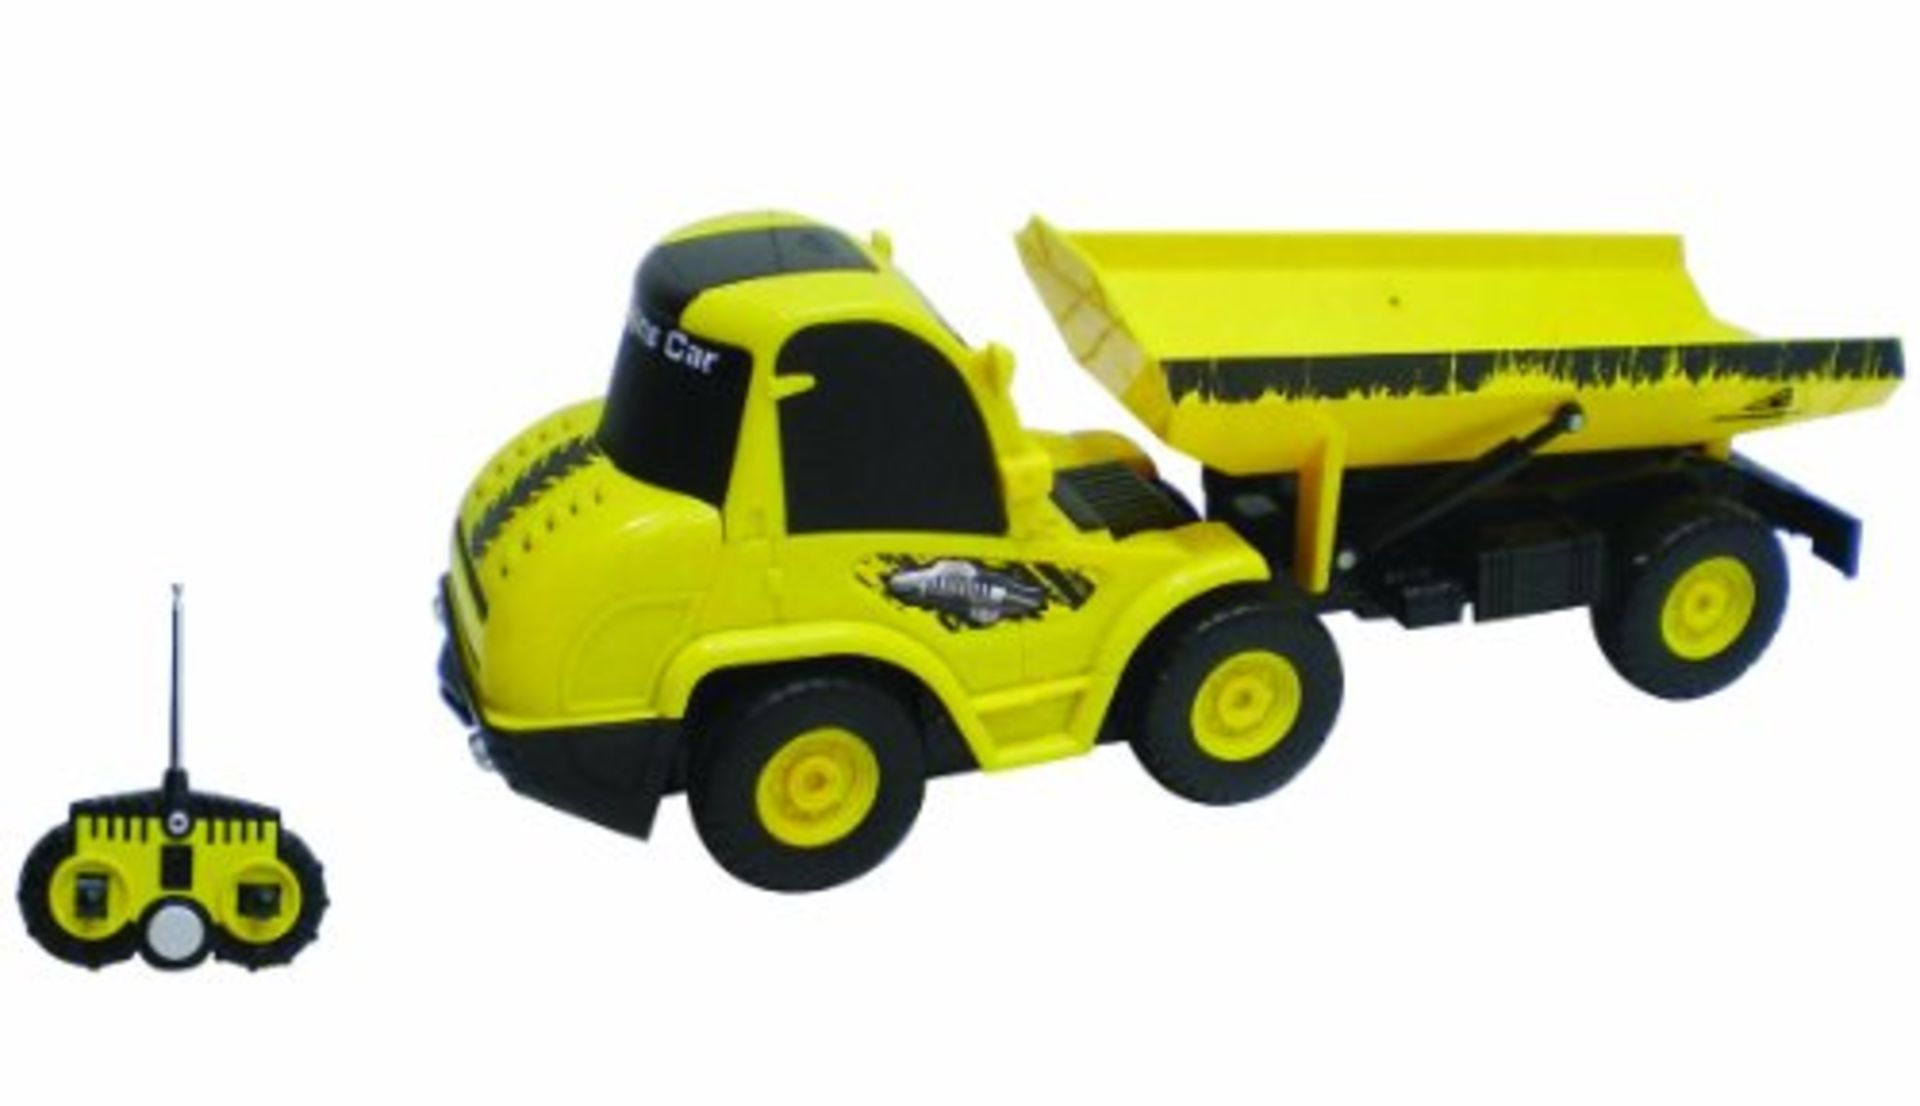 V Brand New 1:20 Remote Control Construction Tipper Vehicle X 2 Bid price to be multiplied by Two